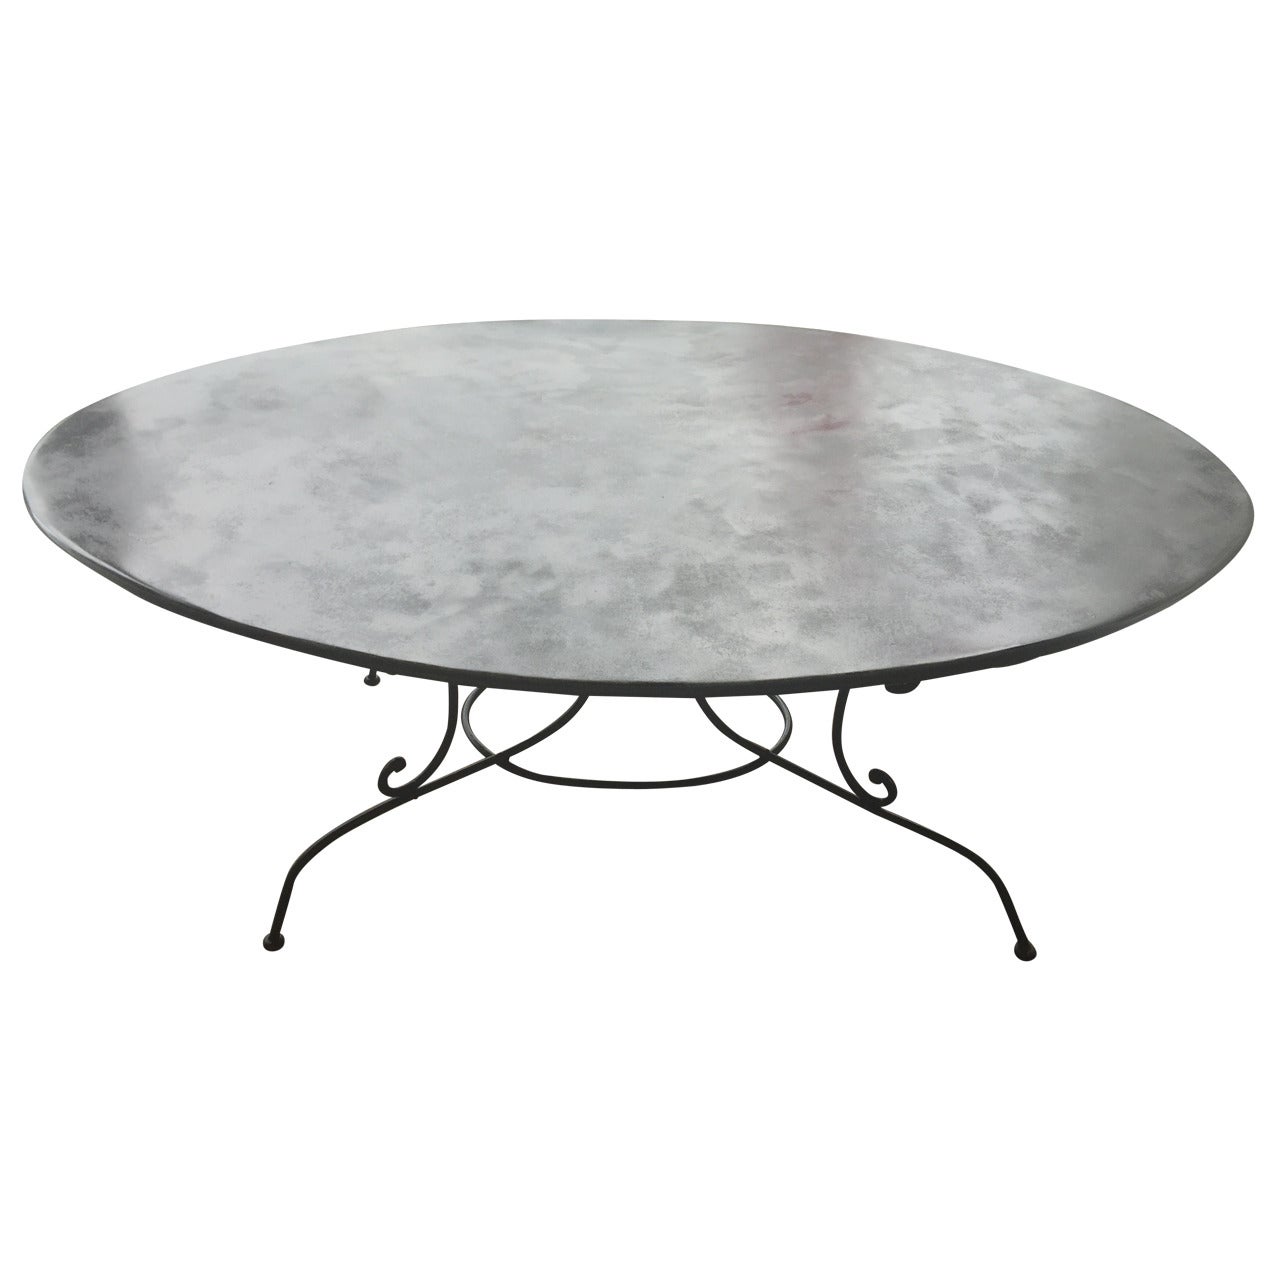 Large Oval French Wrought Iron Dining Table